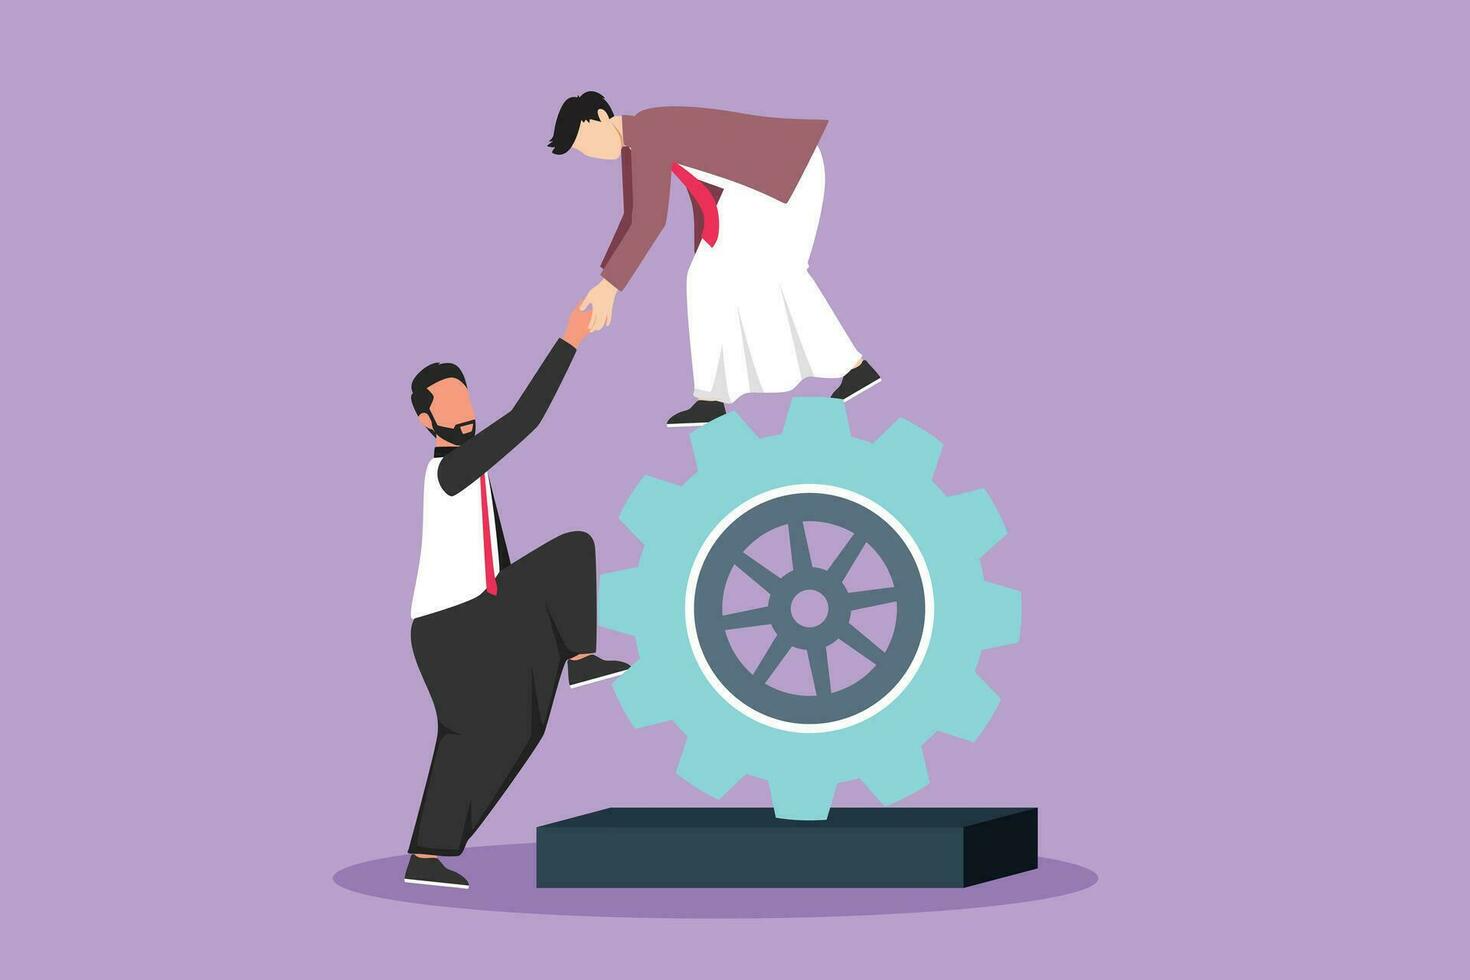 Cartoon flat style drawing two Arab businessmen helping each other on top of cog. Teamwork people help each other trust assistance. Goal with collaboration concept. Graphic design vector illustration